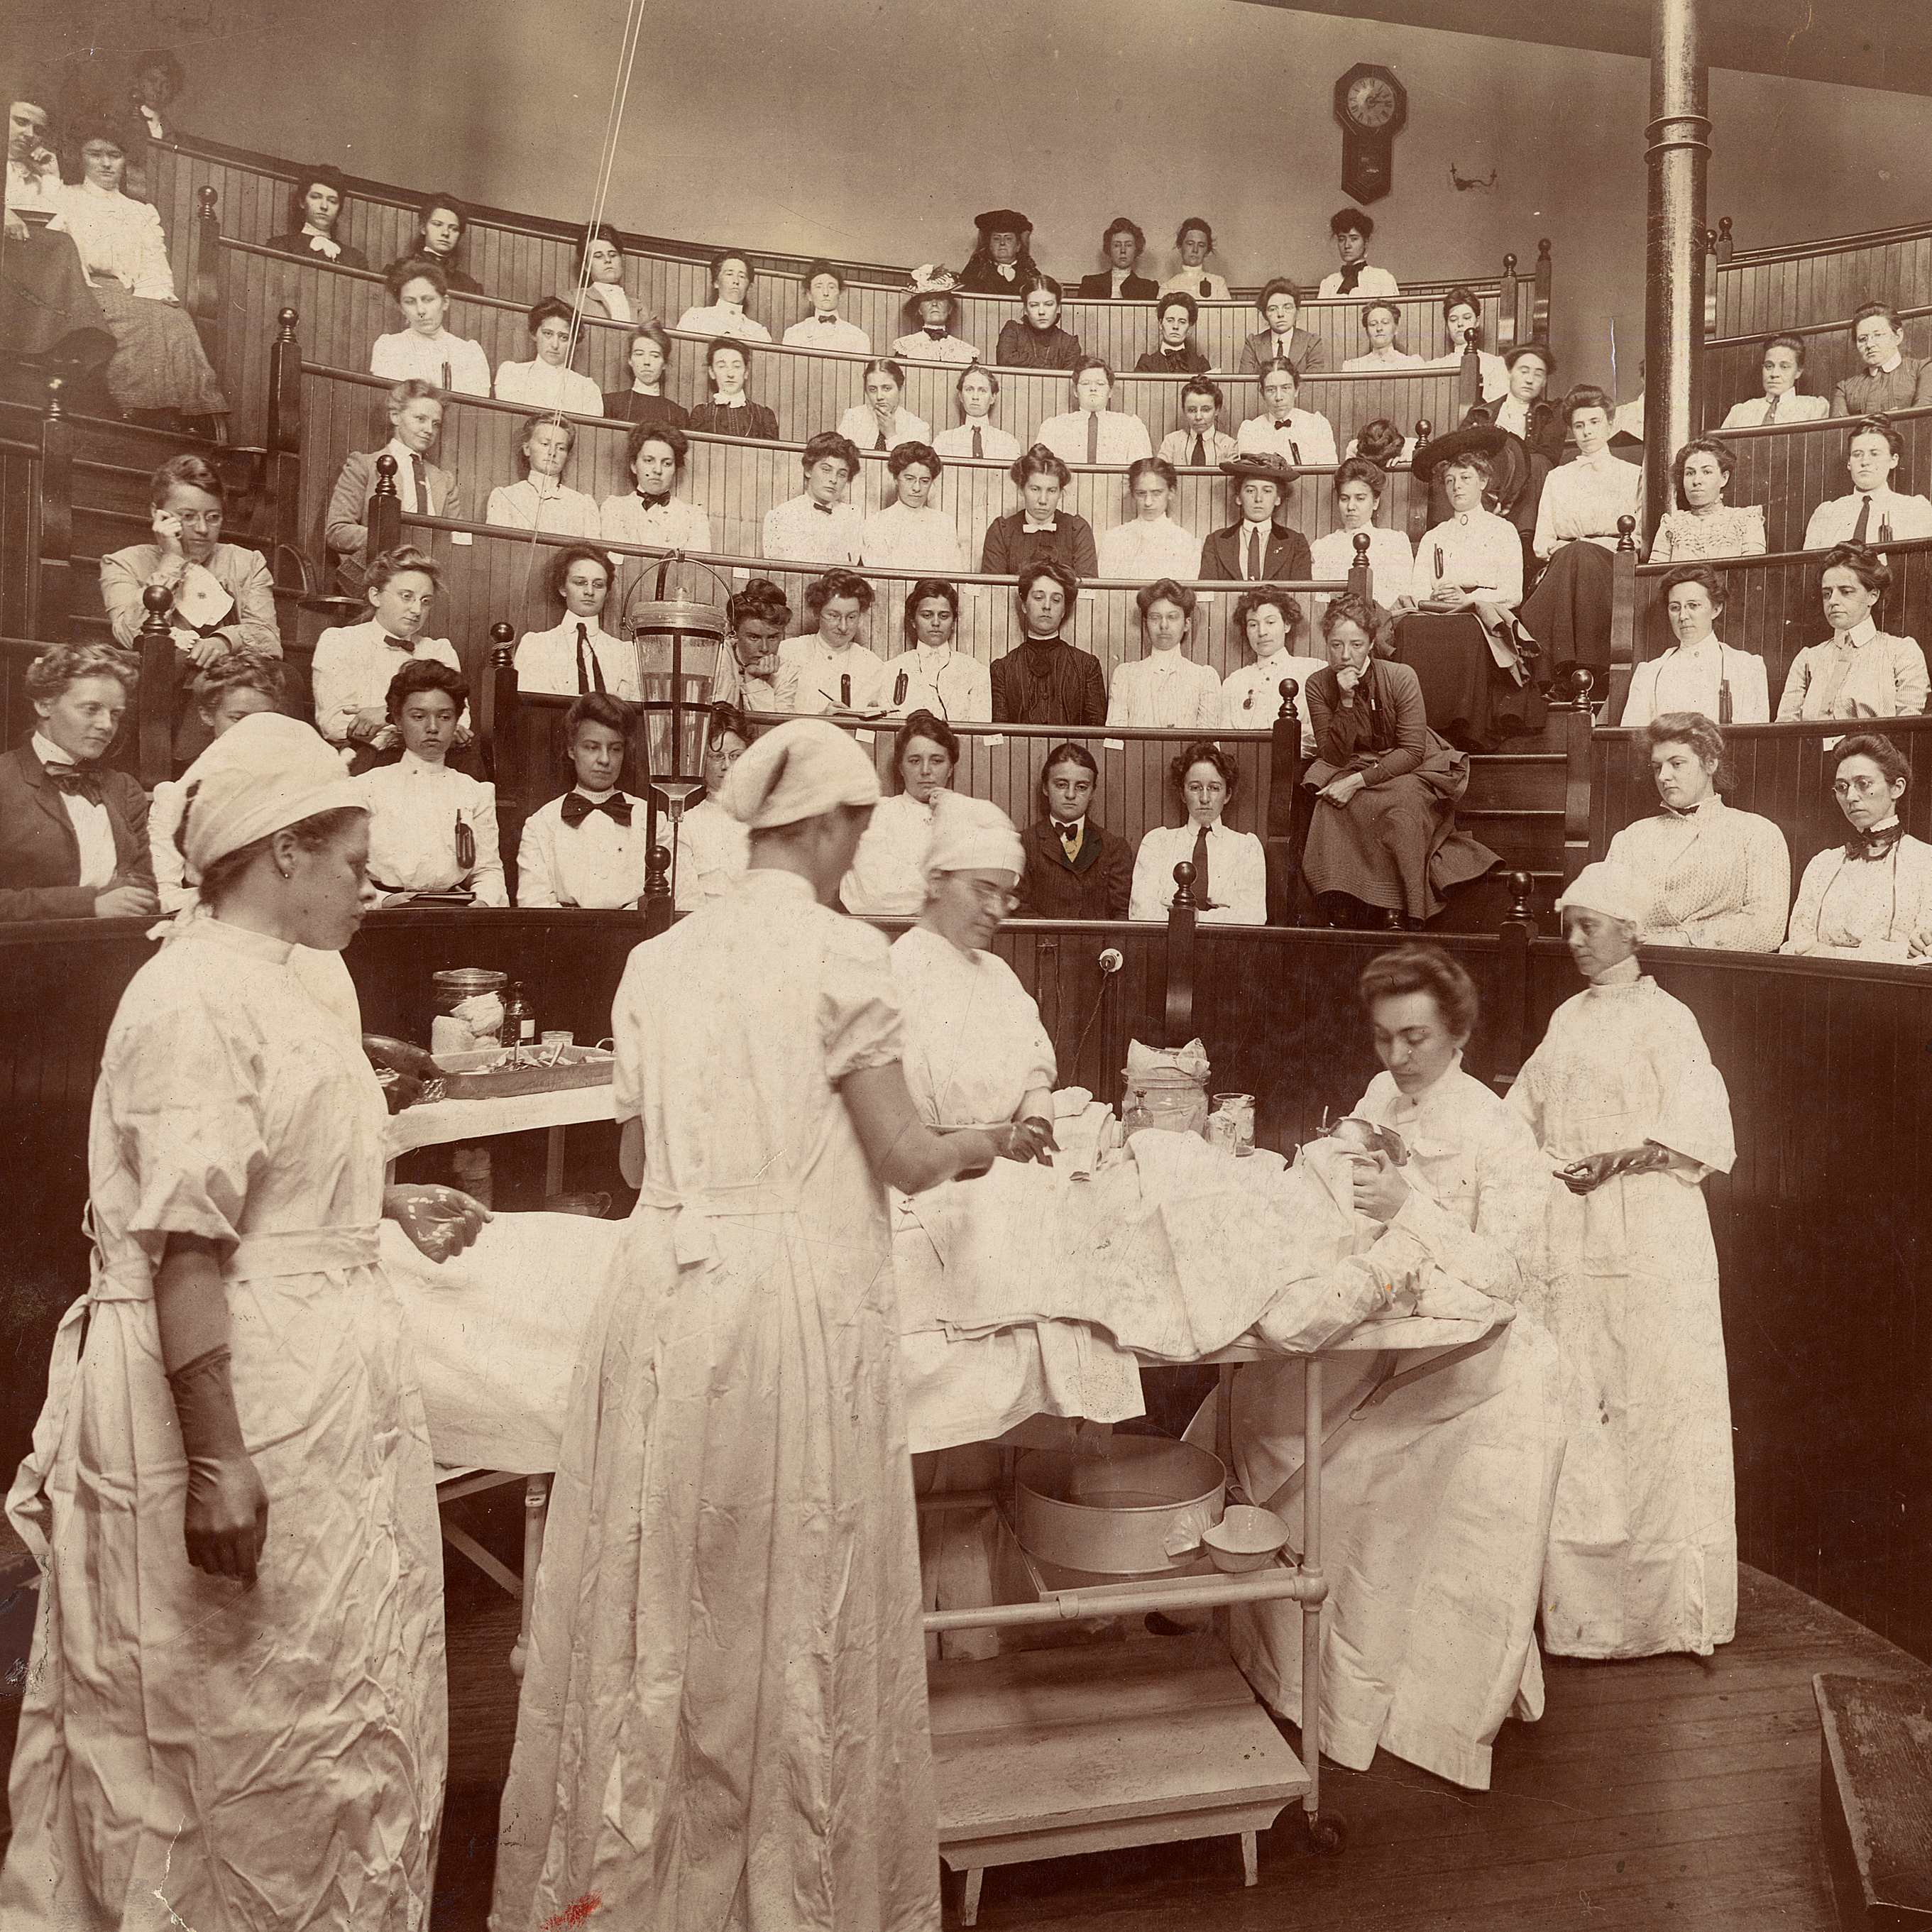 Women Physicians digital collection; Woman's Medical College of Pennsylvania amphitheater, 1903